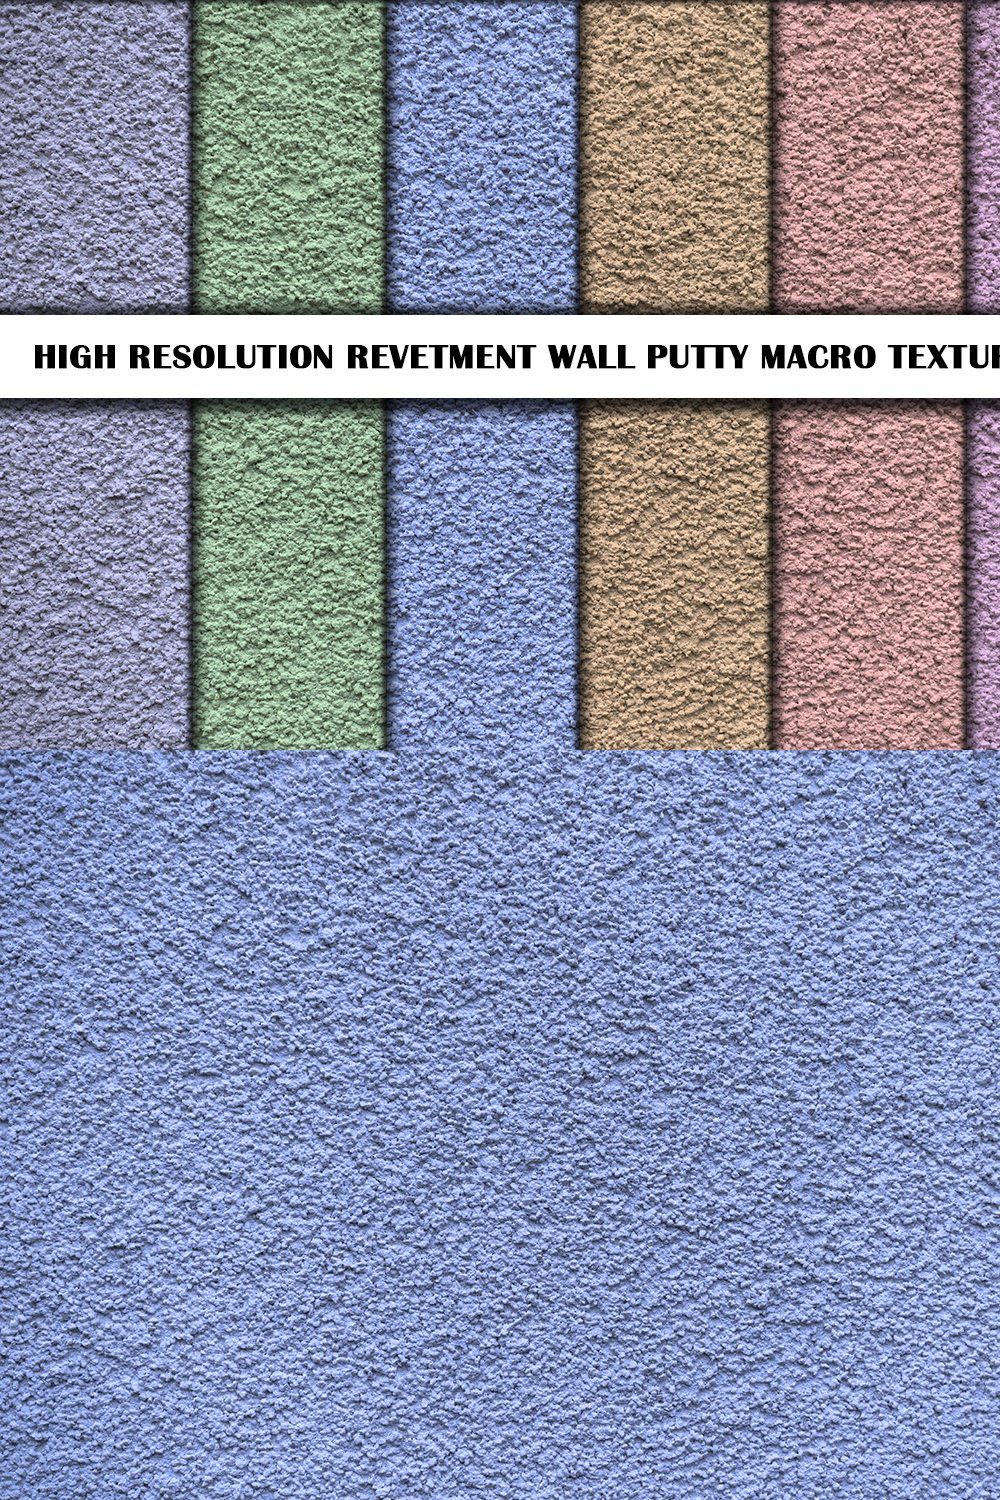 High resolution putty wall textures pinterest preview image.